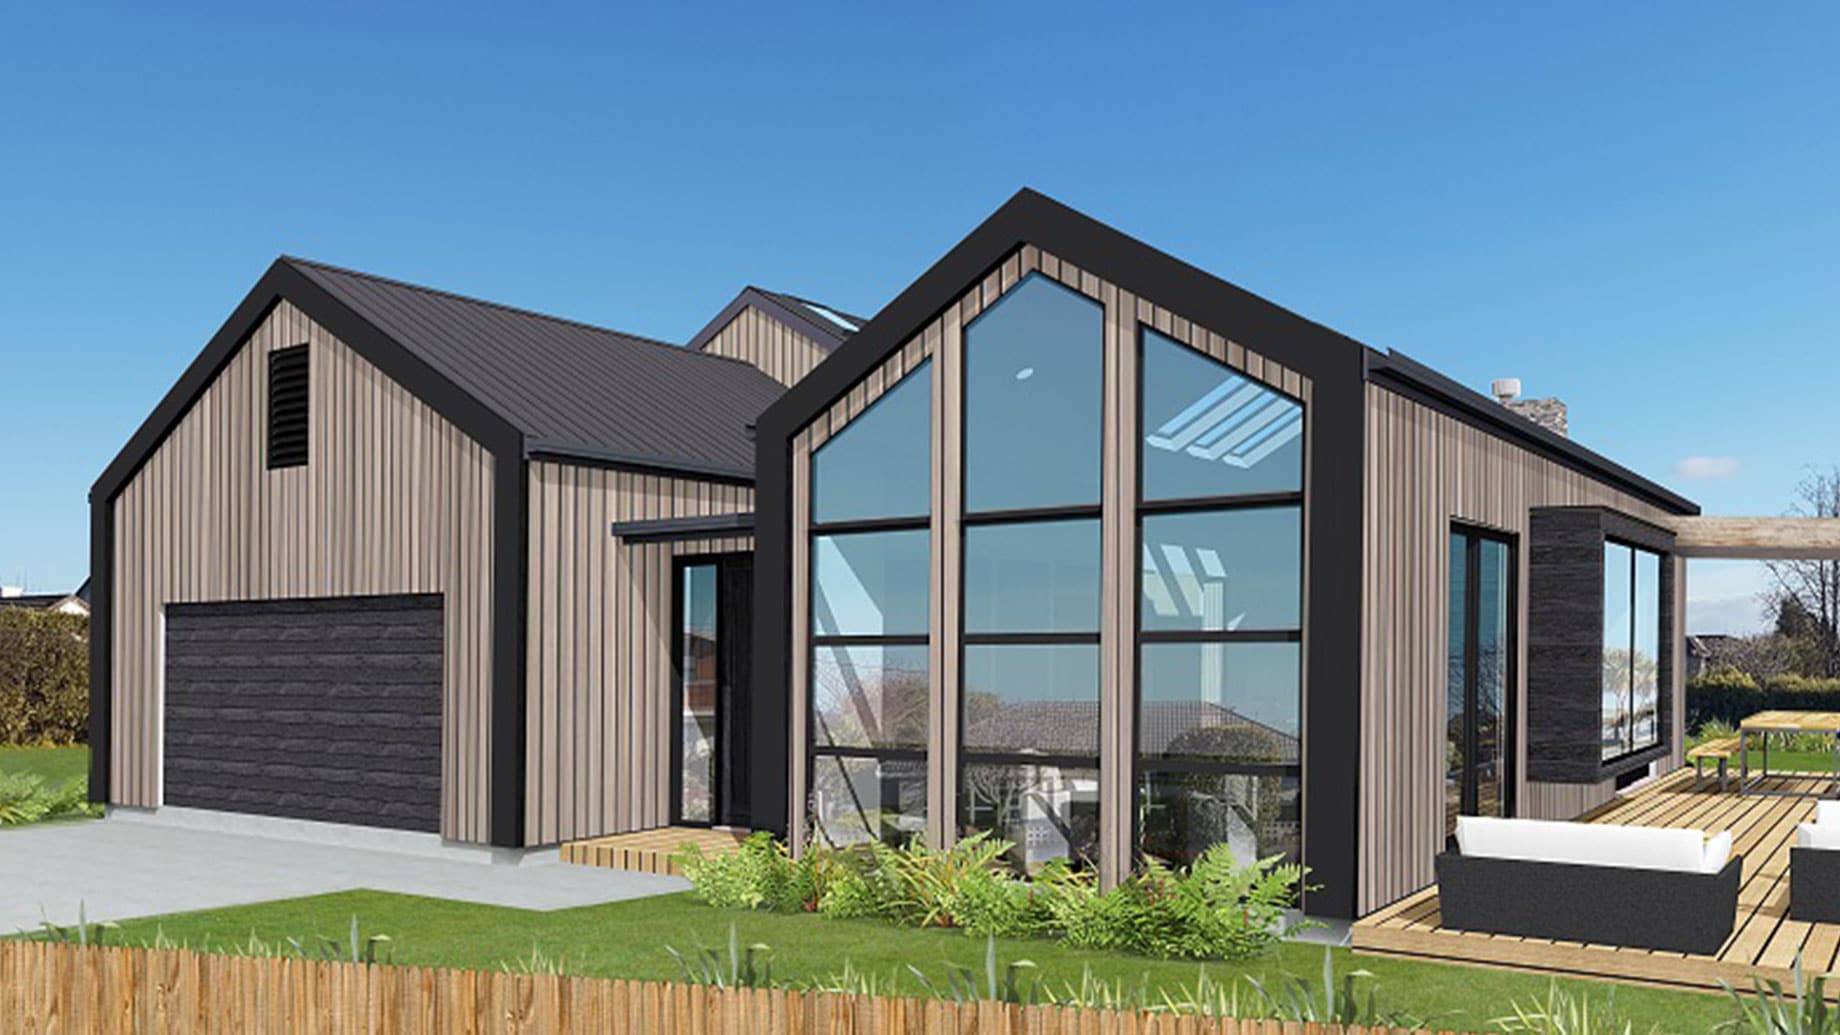 Taupo showhome house render